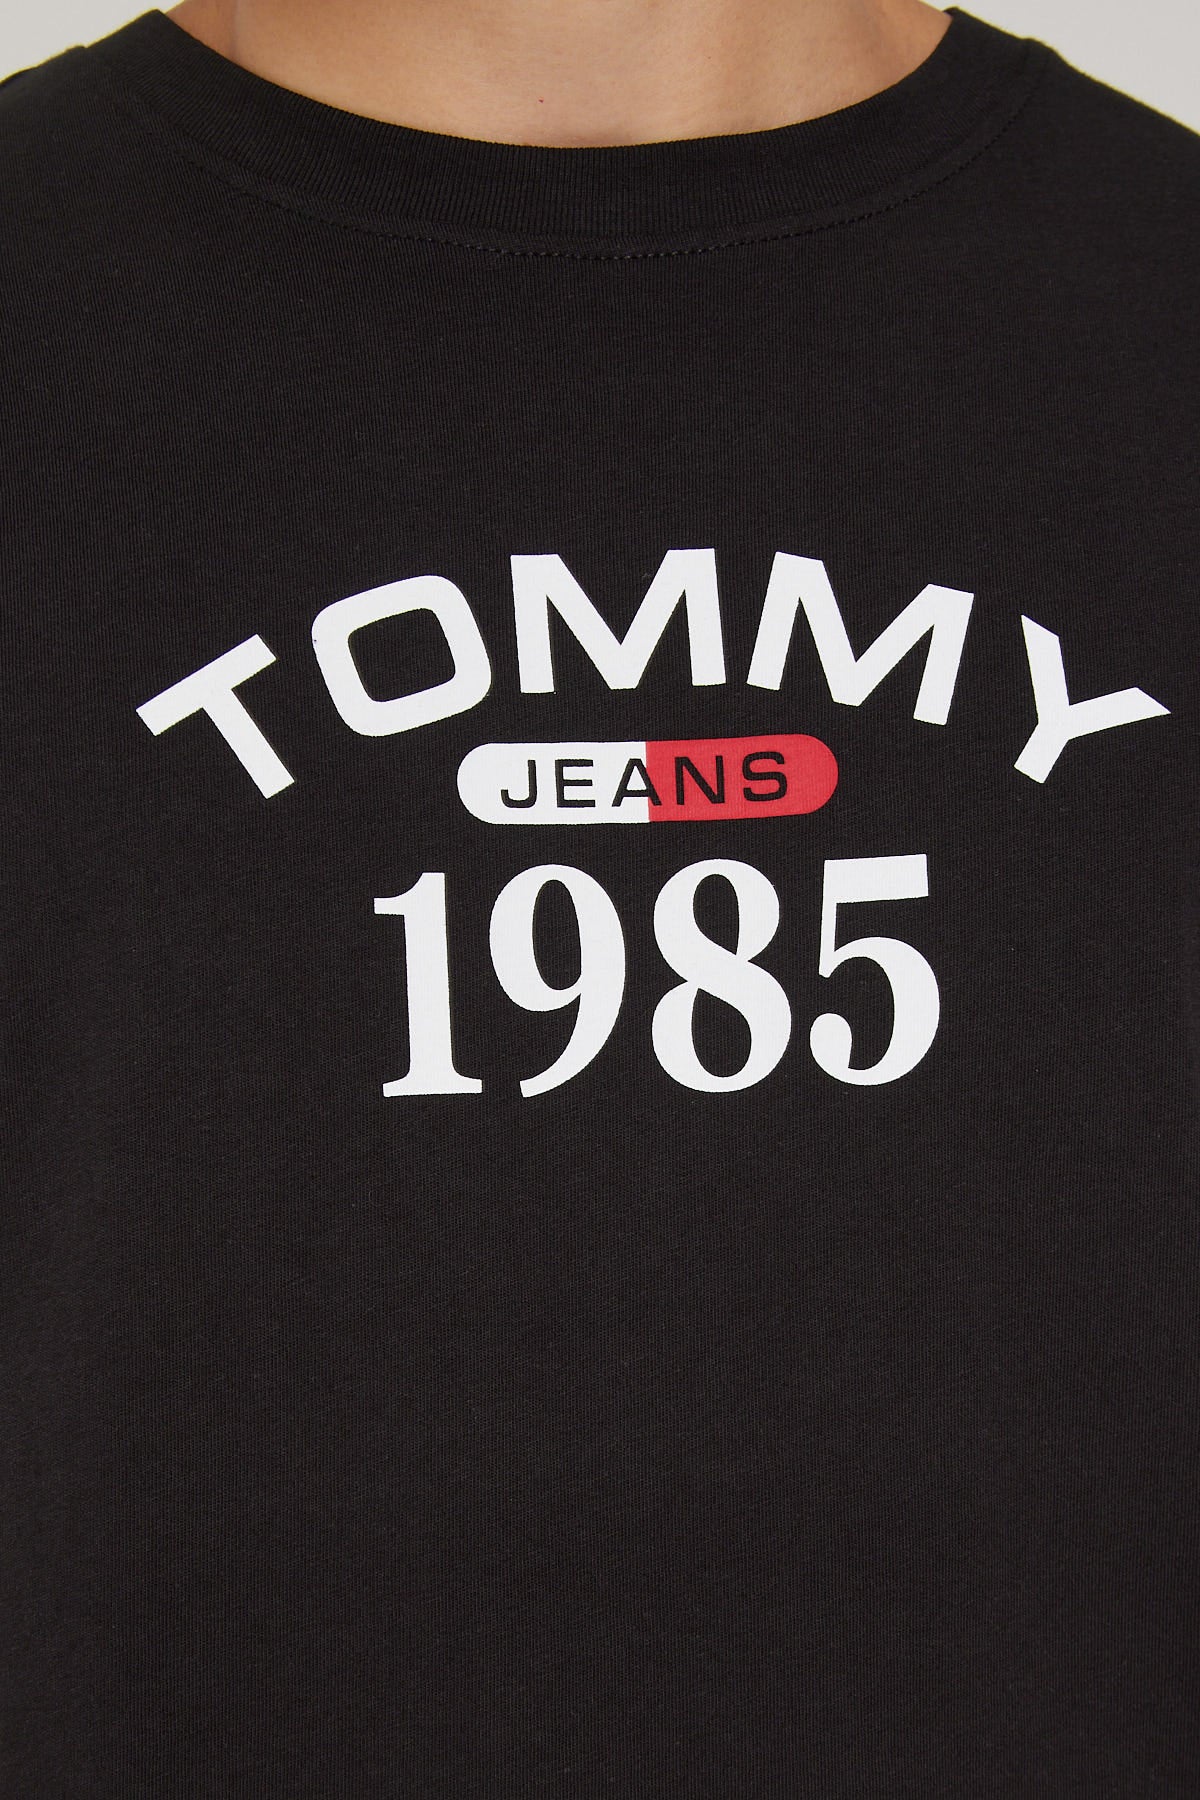 Tommy Jeans TJM CLSC Athletic Flag Tee White – Universal Store